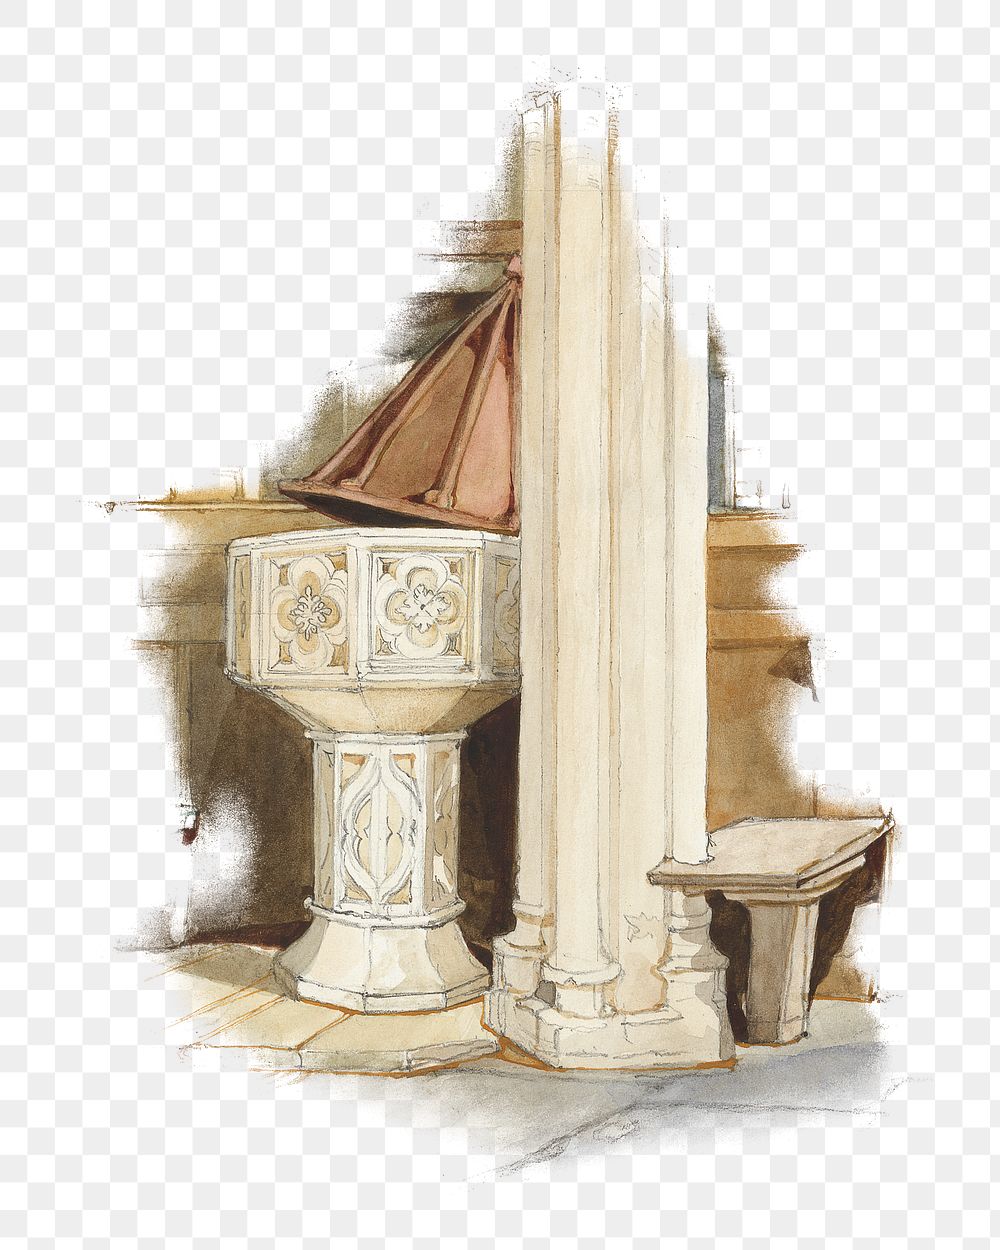 PNG Pillar, medieval architecture illustration by Rev. James Bulwer, transparent background.  Remixed by rawpixel. 